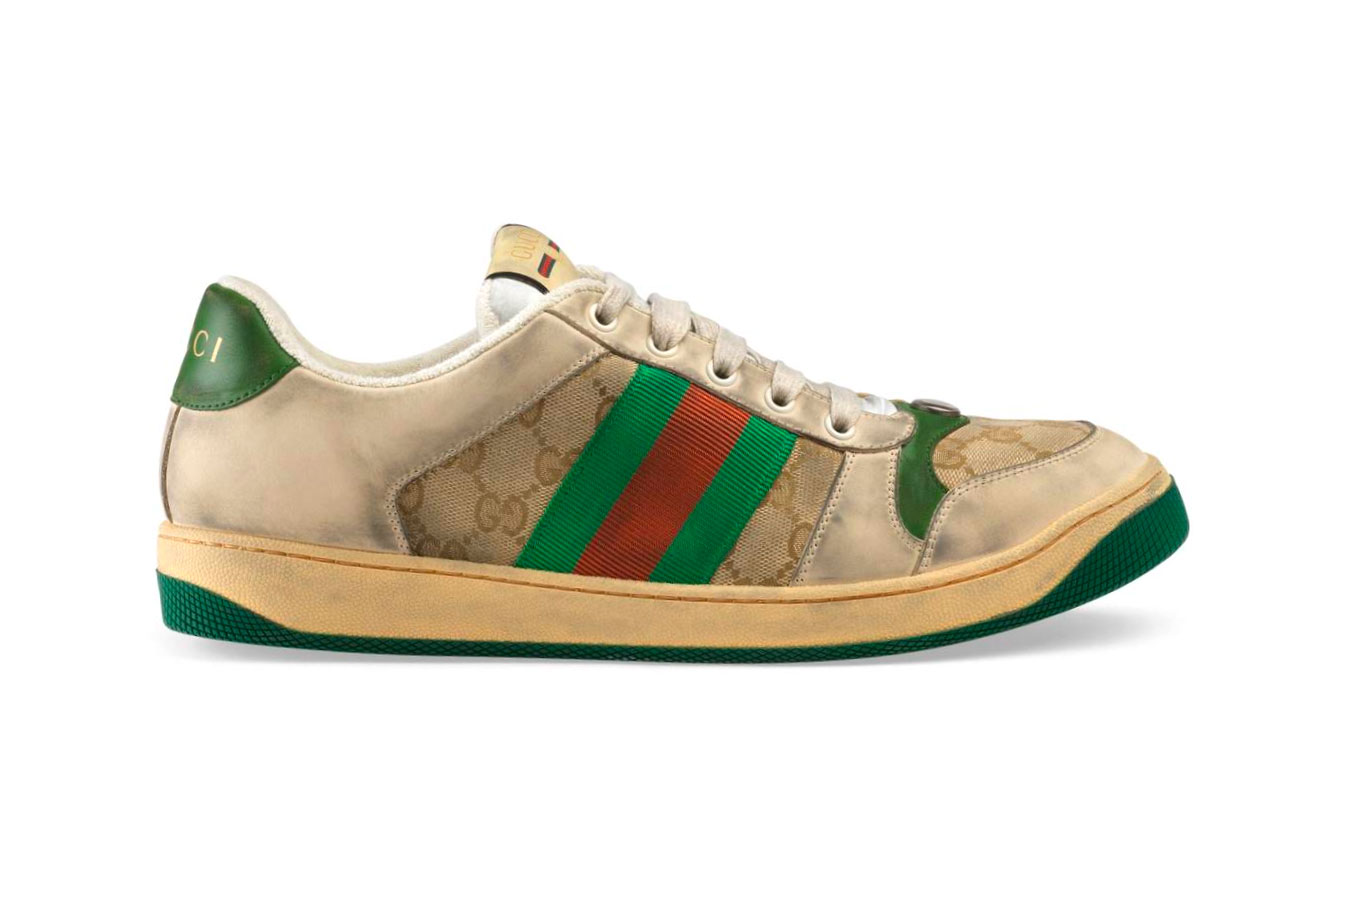 Gucci "Distressed" GG Canvas & Leather Sneakers | HYPEBEAST